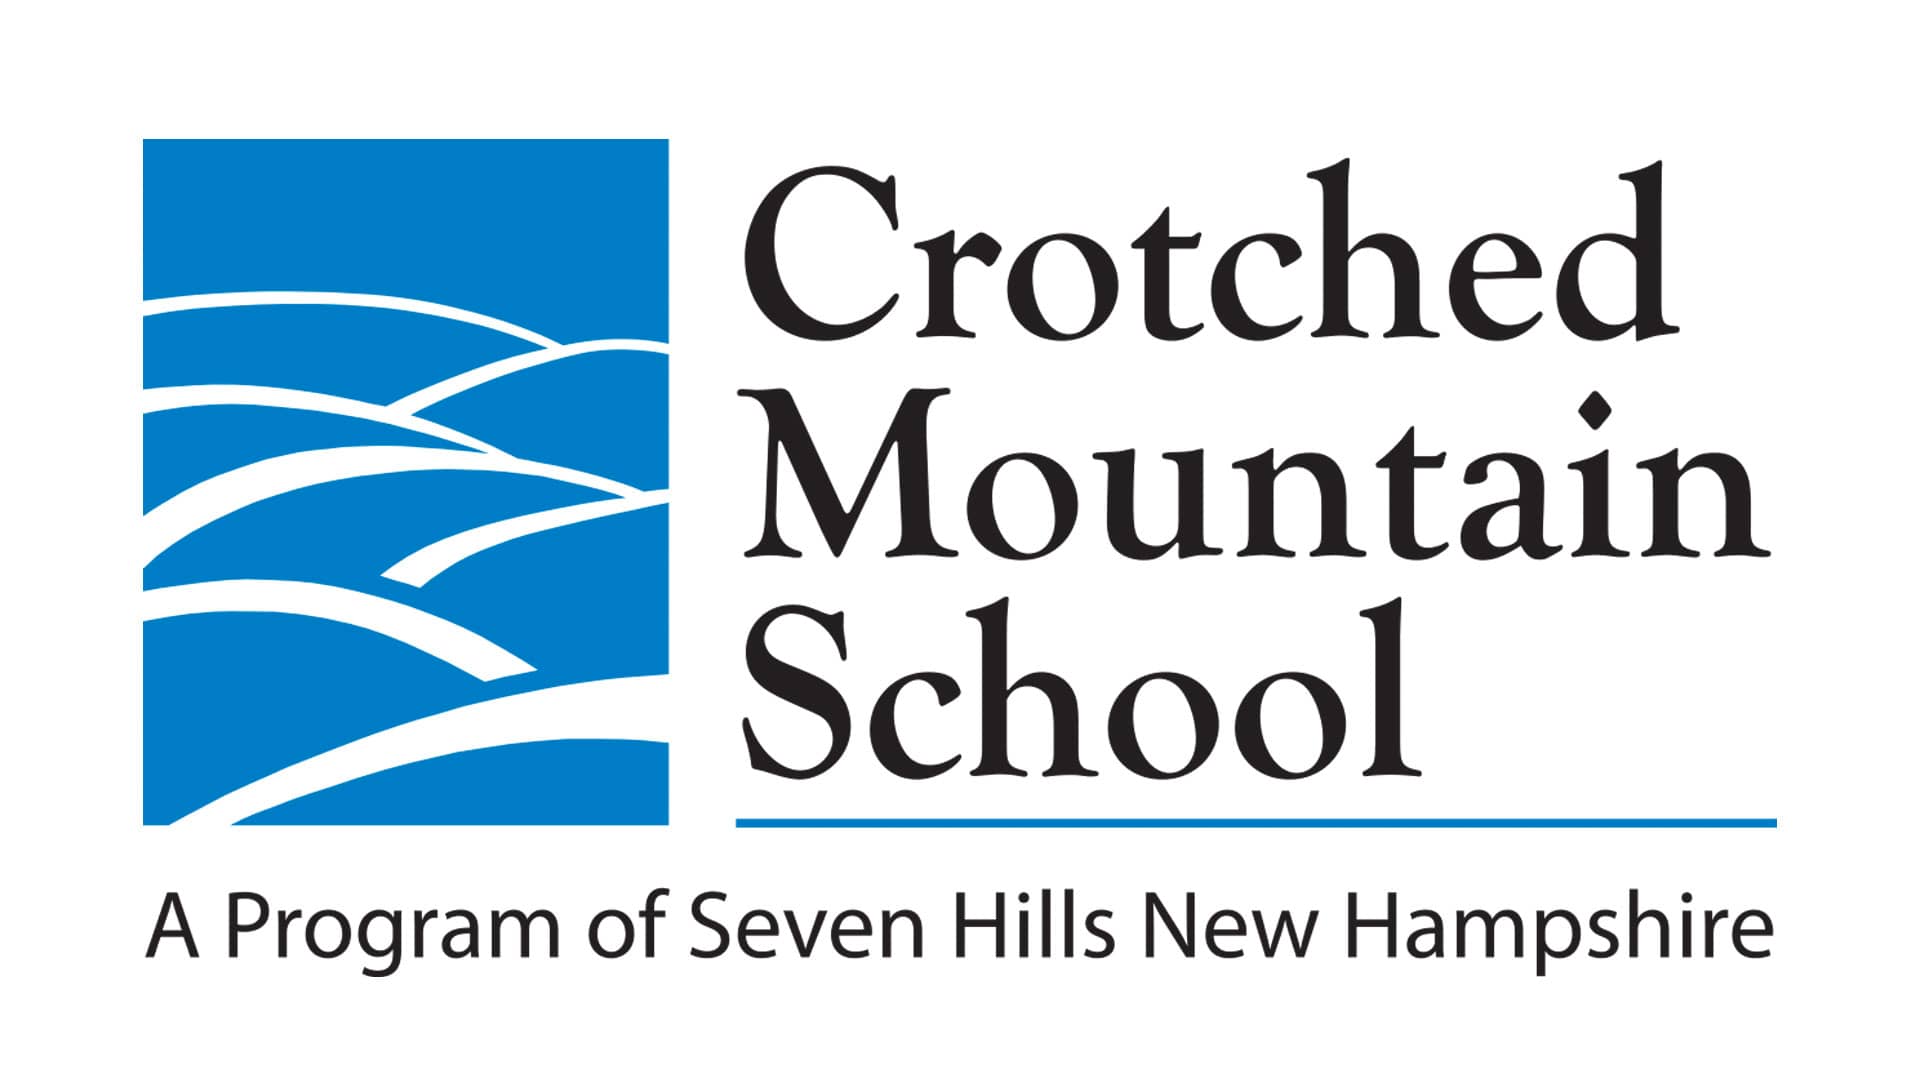 Crotched Mountain School, A Program of Seven Hills New Hampshire on Vimeo